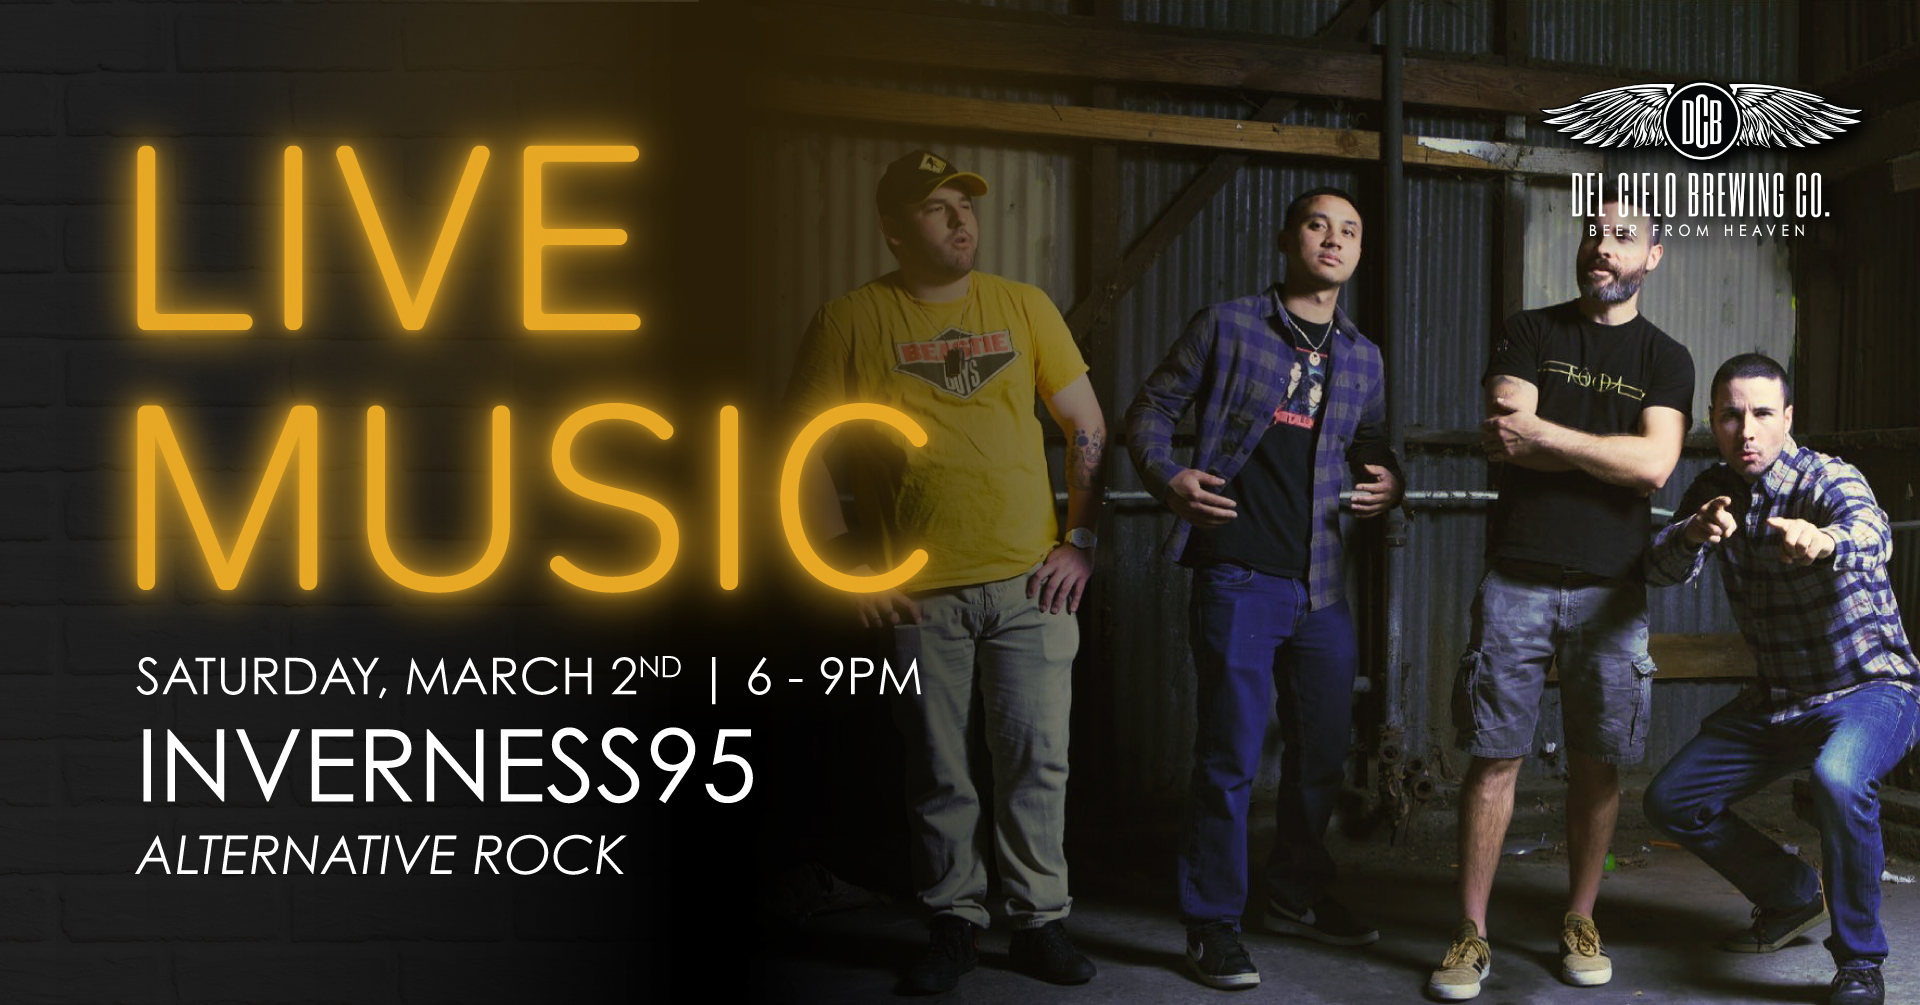 Inverness 95 live music poster, March 2nd 6-9PM.